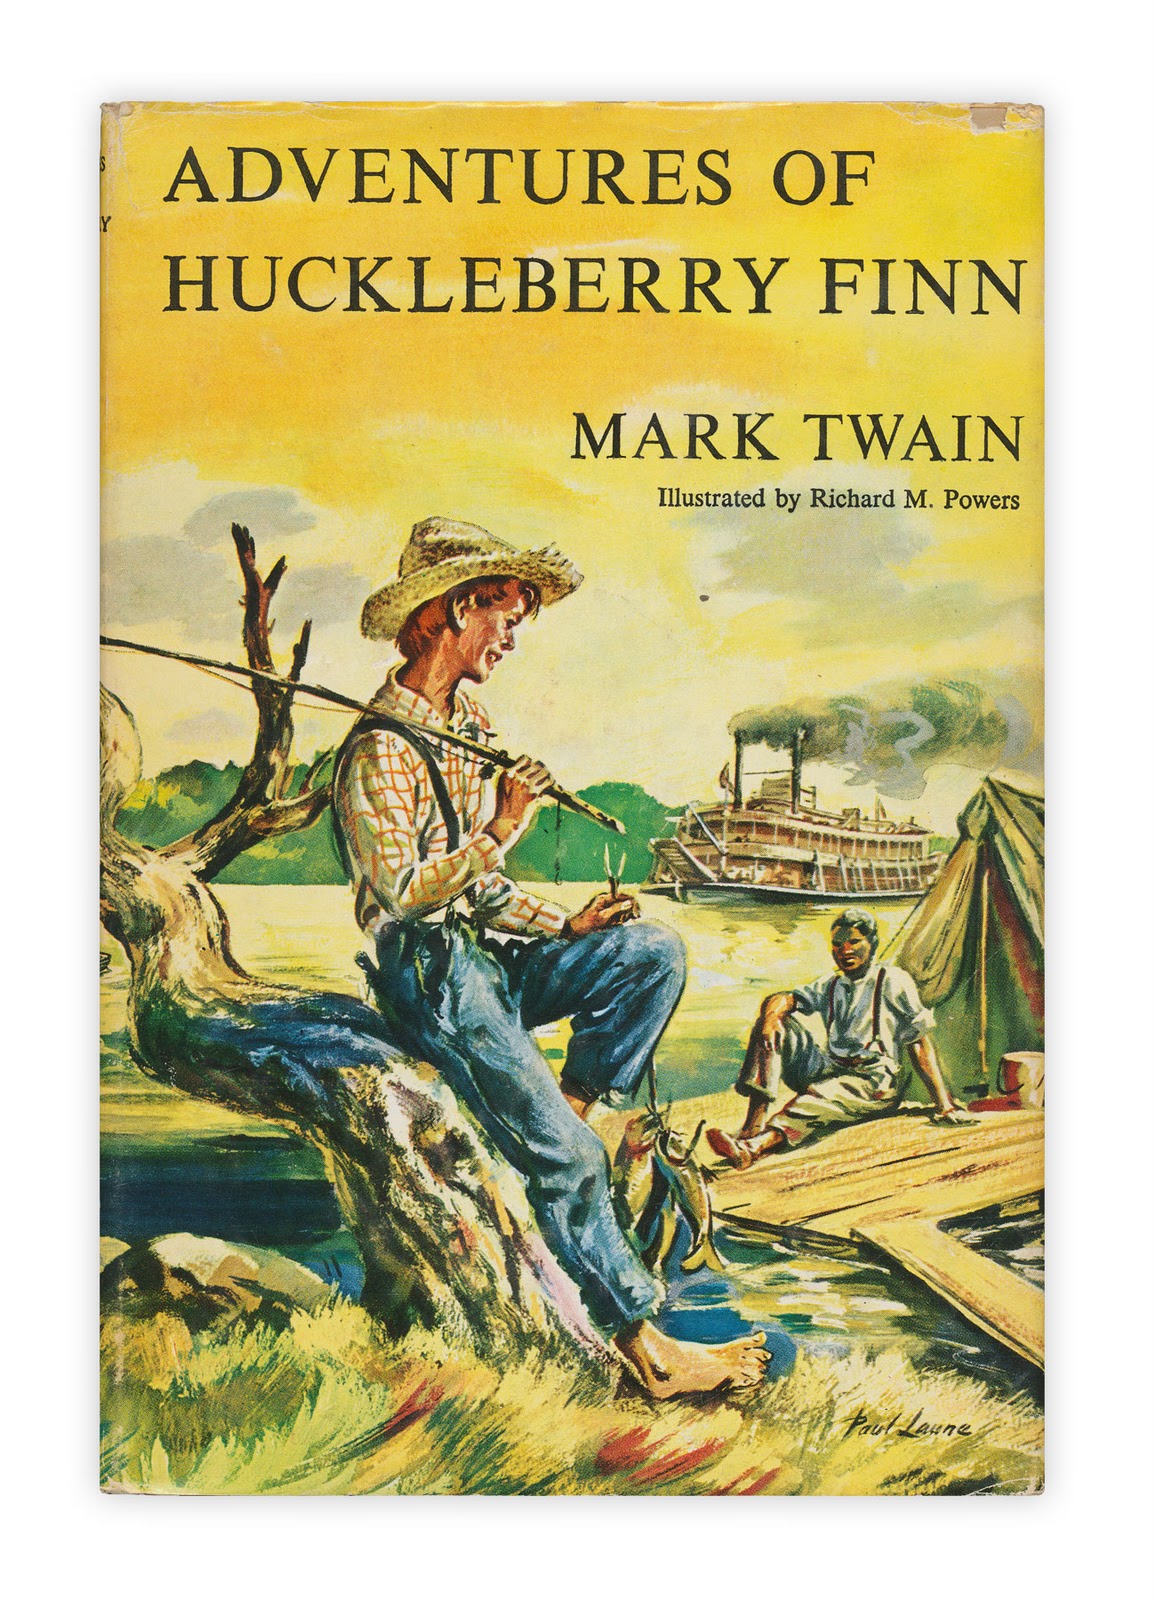 Essay about the adventure of huckleberry finn